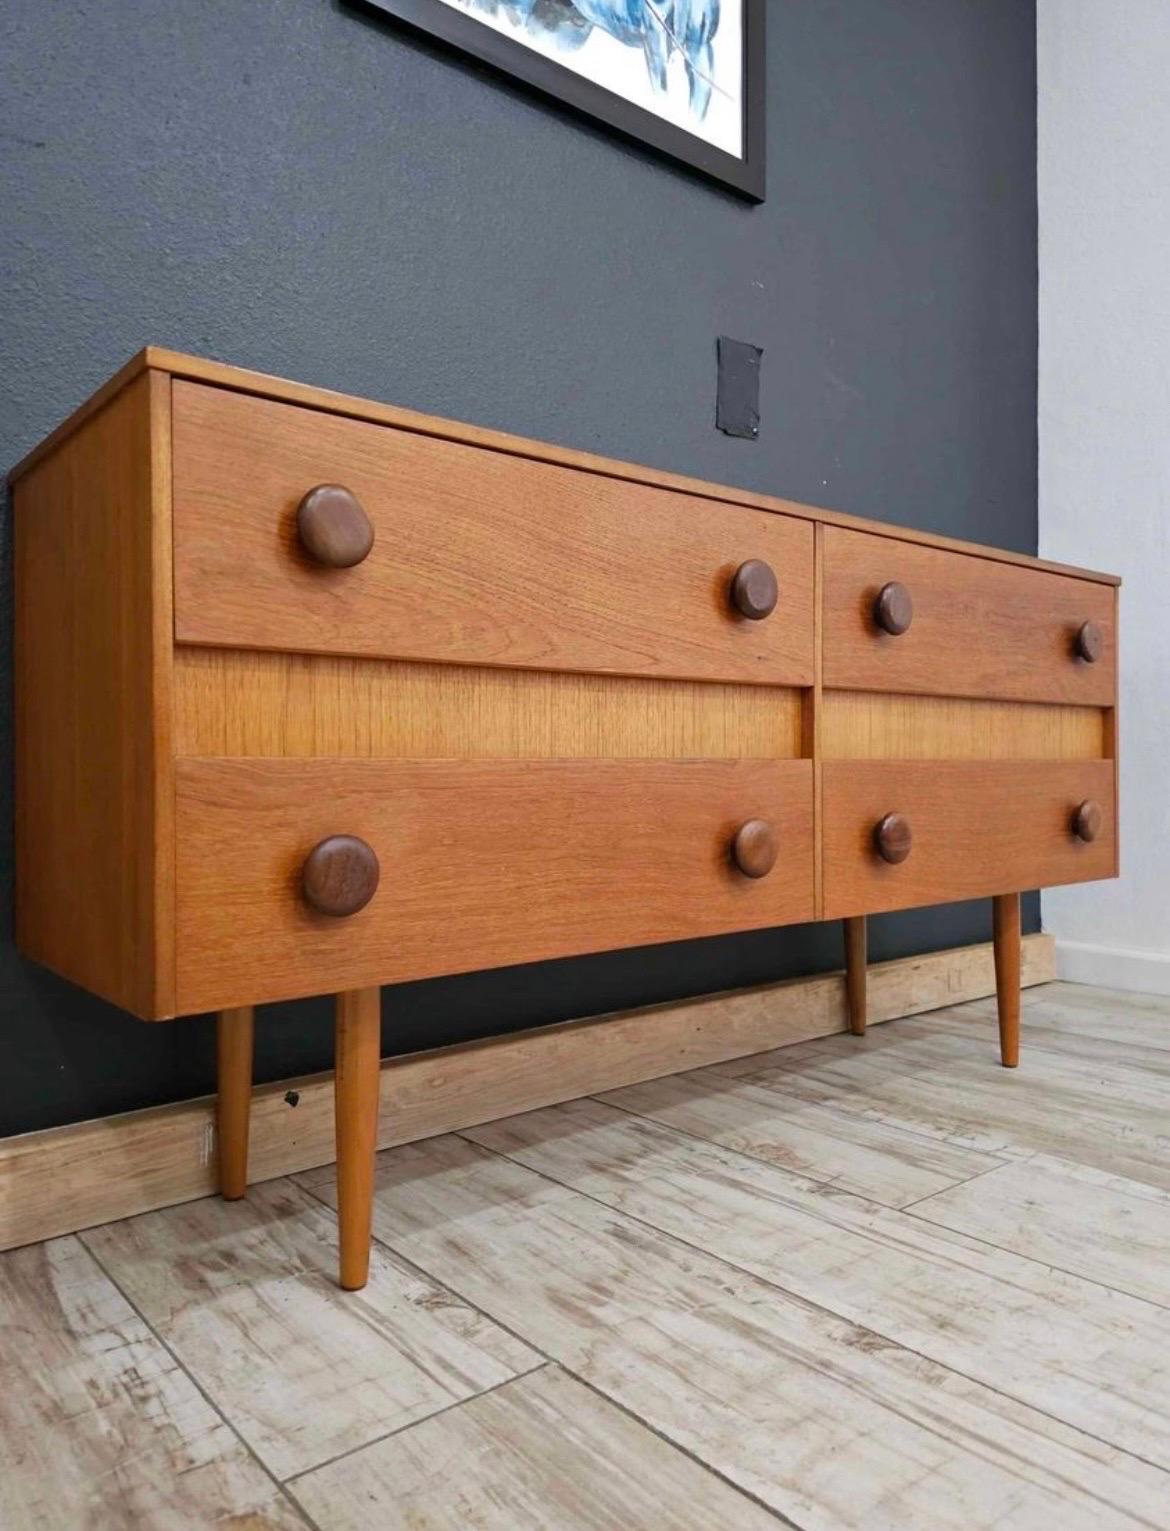 uper clean, mint condition four drawer danish dresser with mcm style peg legs! Everything is perfect on this piece. Show stopping large knobs give this piece it’s unique flare. Featuring four pullout drawers. Could be used as a dresser or stunning